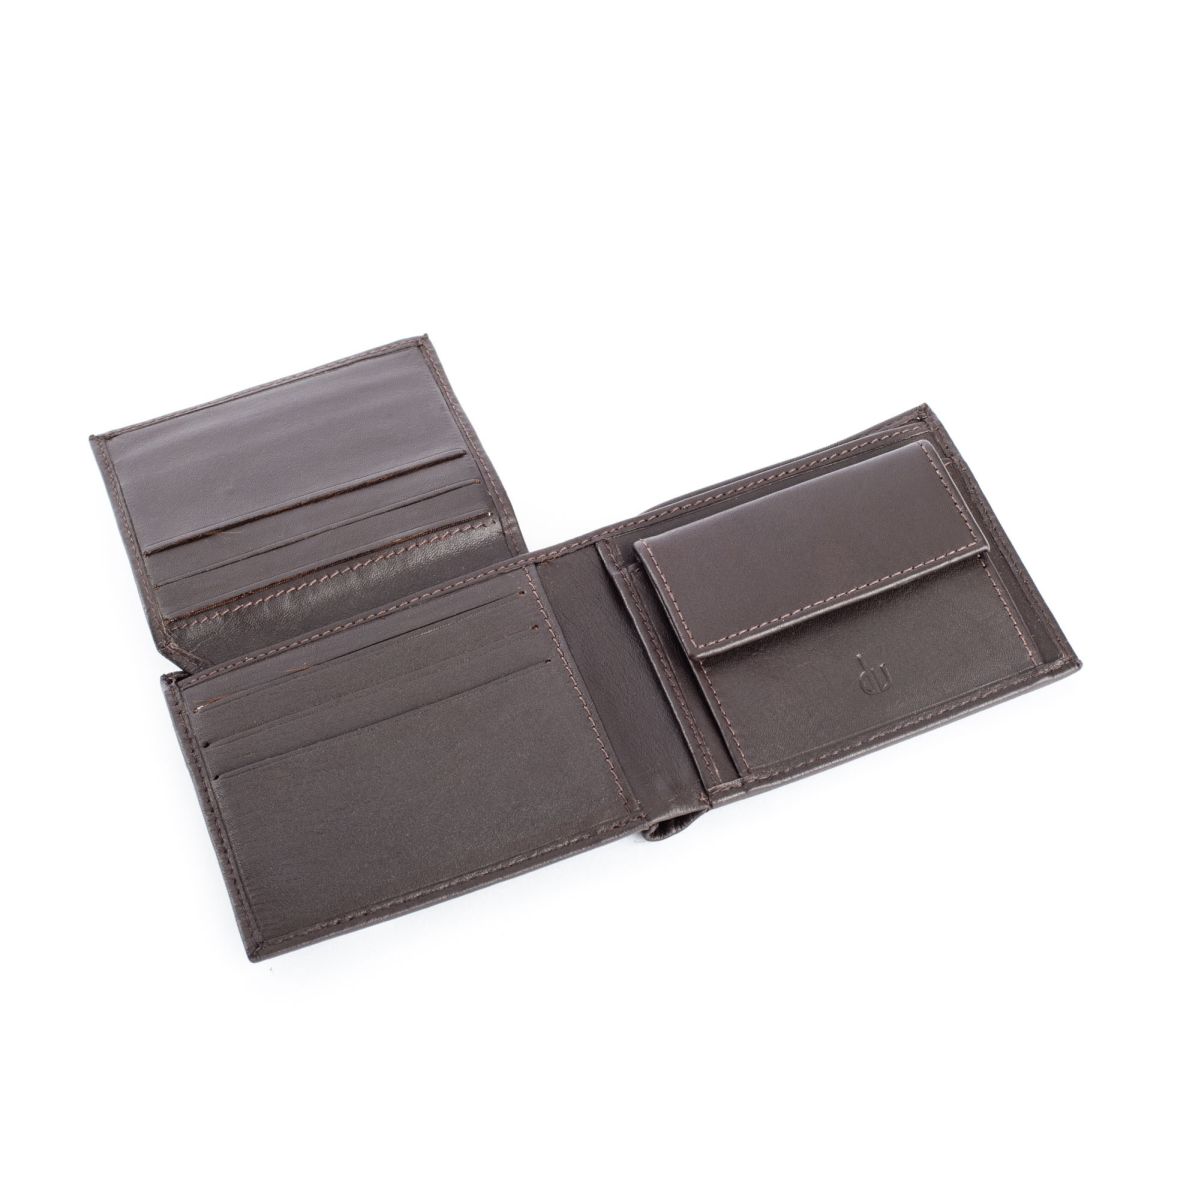 dv Compact Leather Wallet With Coin Pocket - Dark Brown